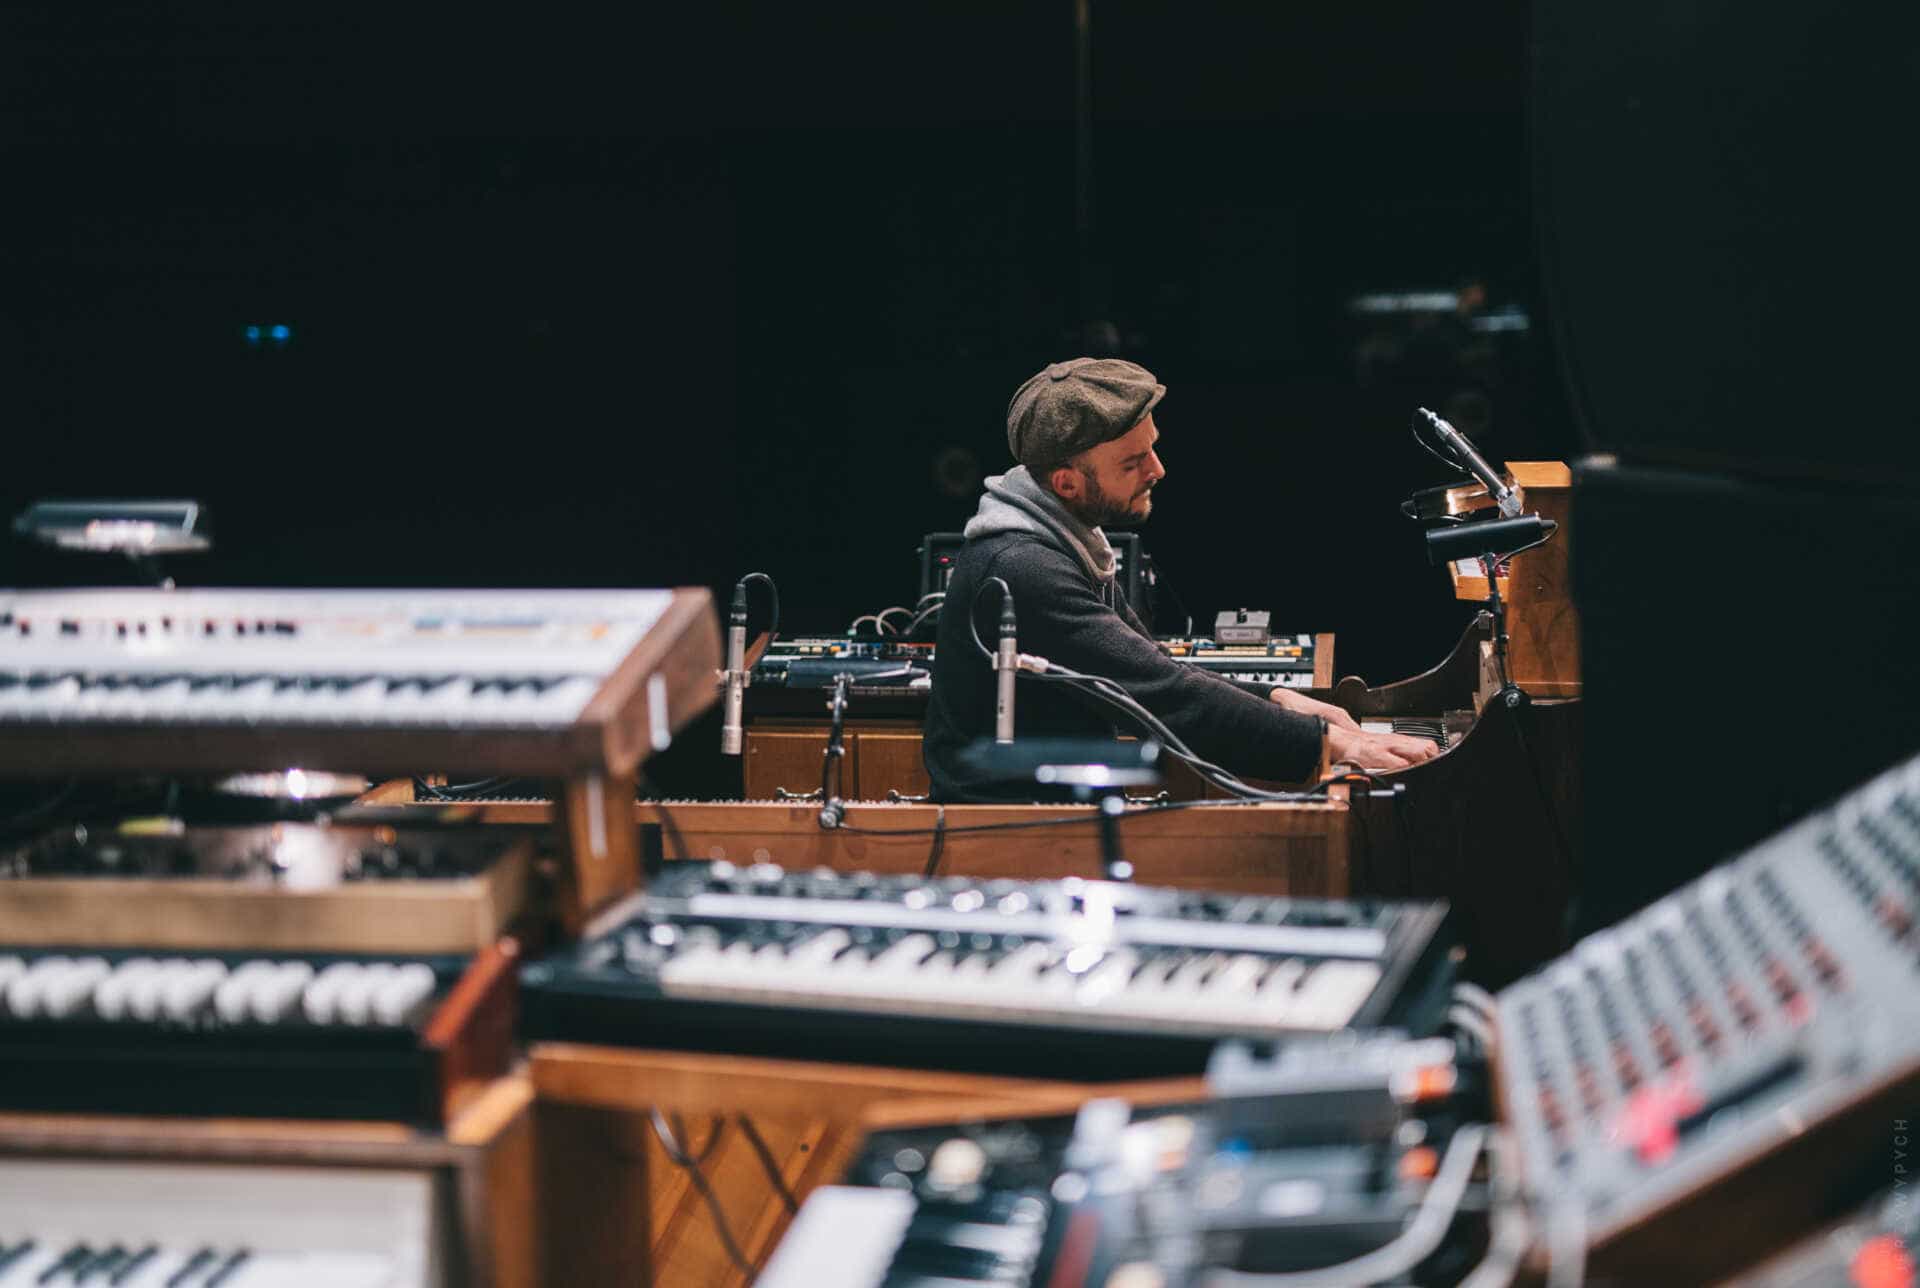 Nils Frahm playing a piano, surrounded by musical instruments.